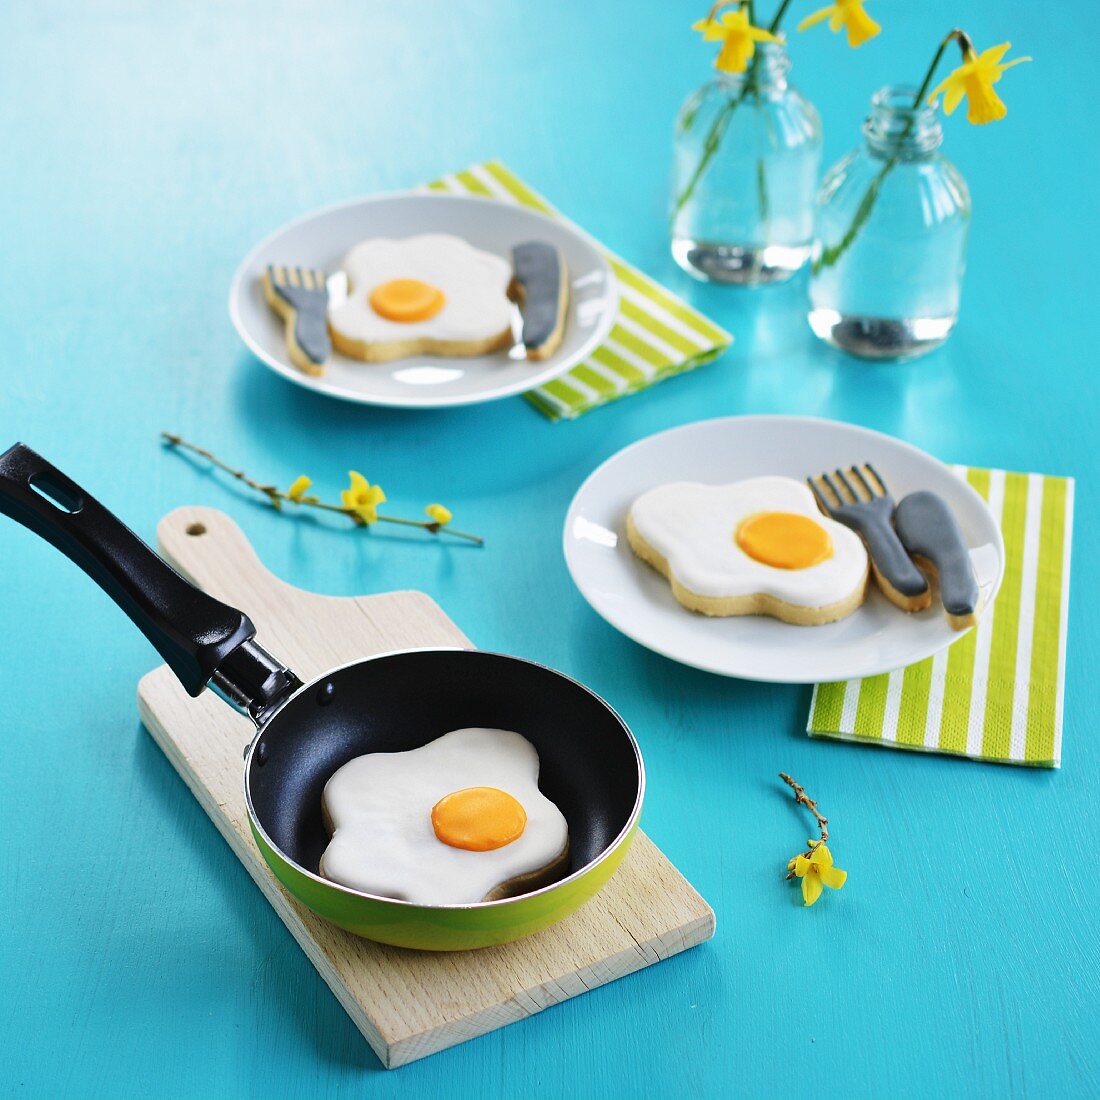 Fried egg and cutlery-shaped biscuits in a pan and on plates